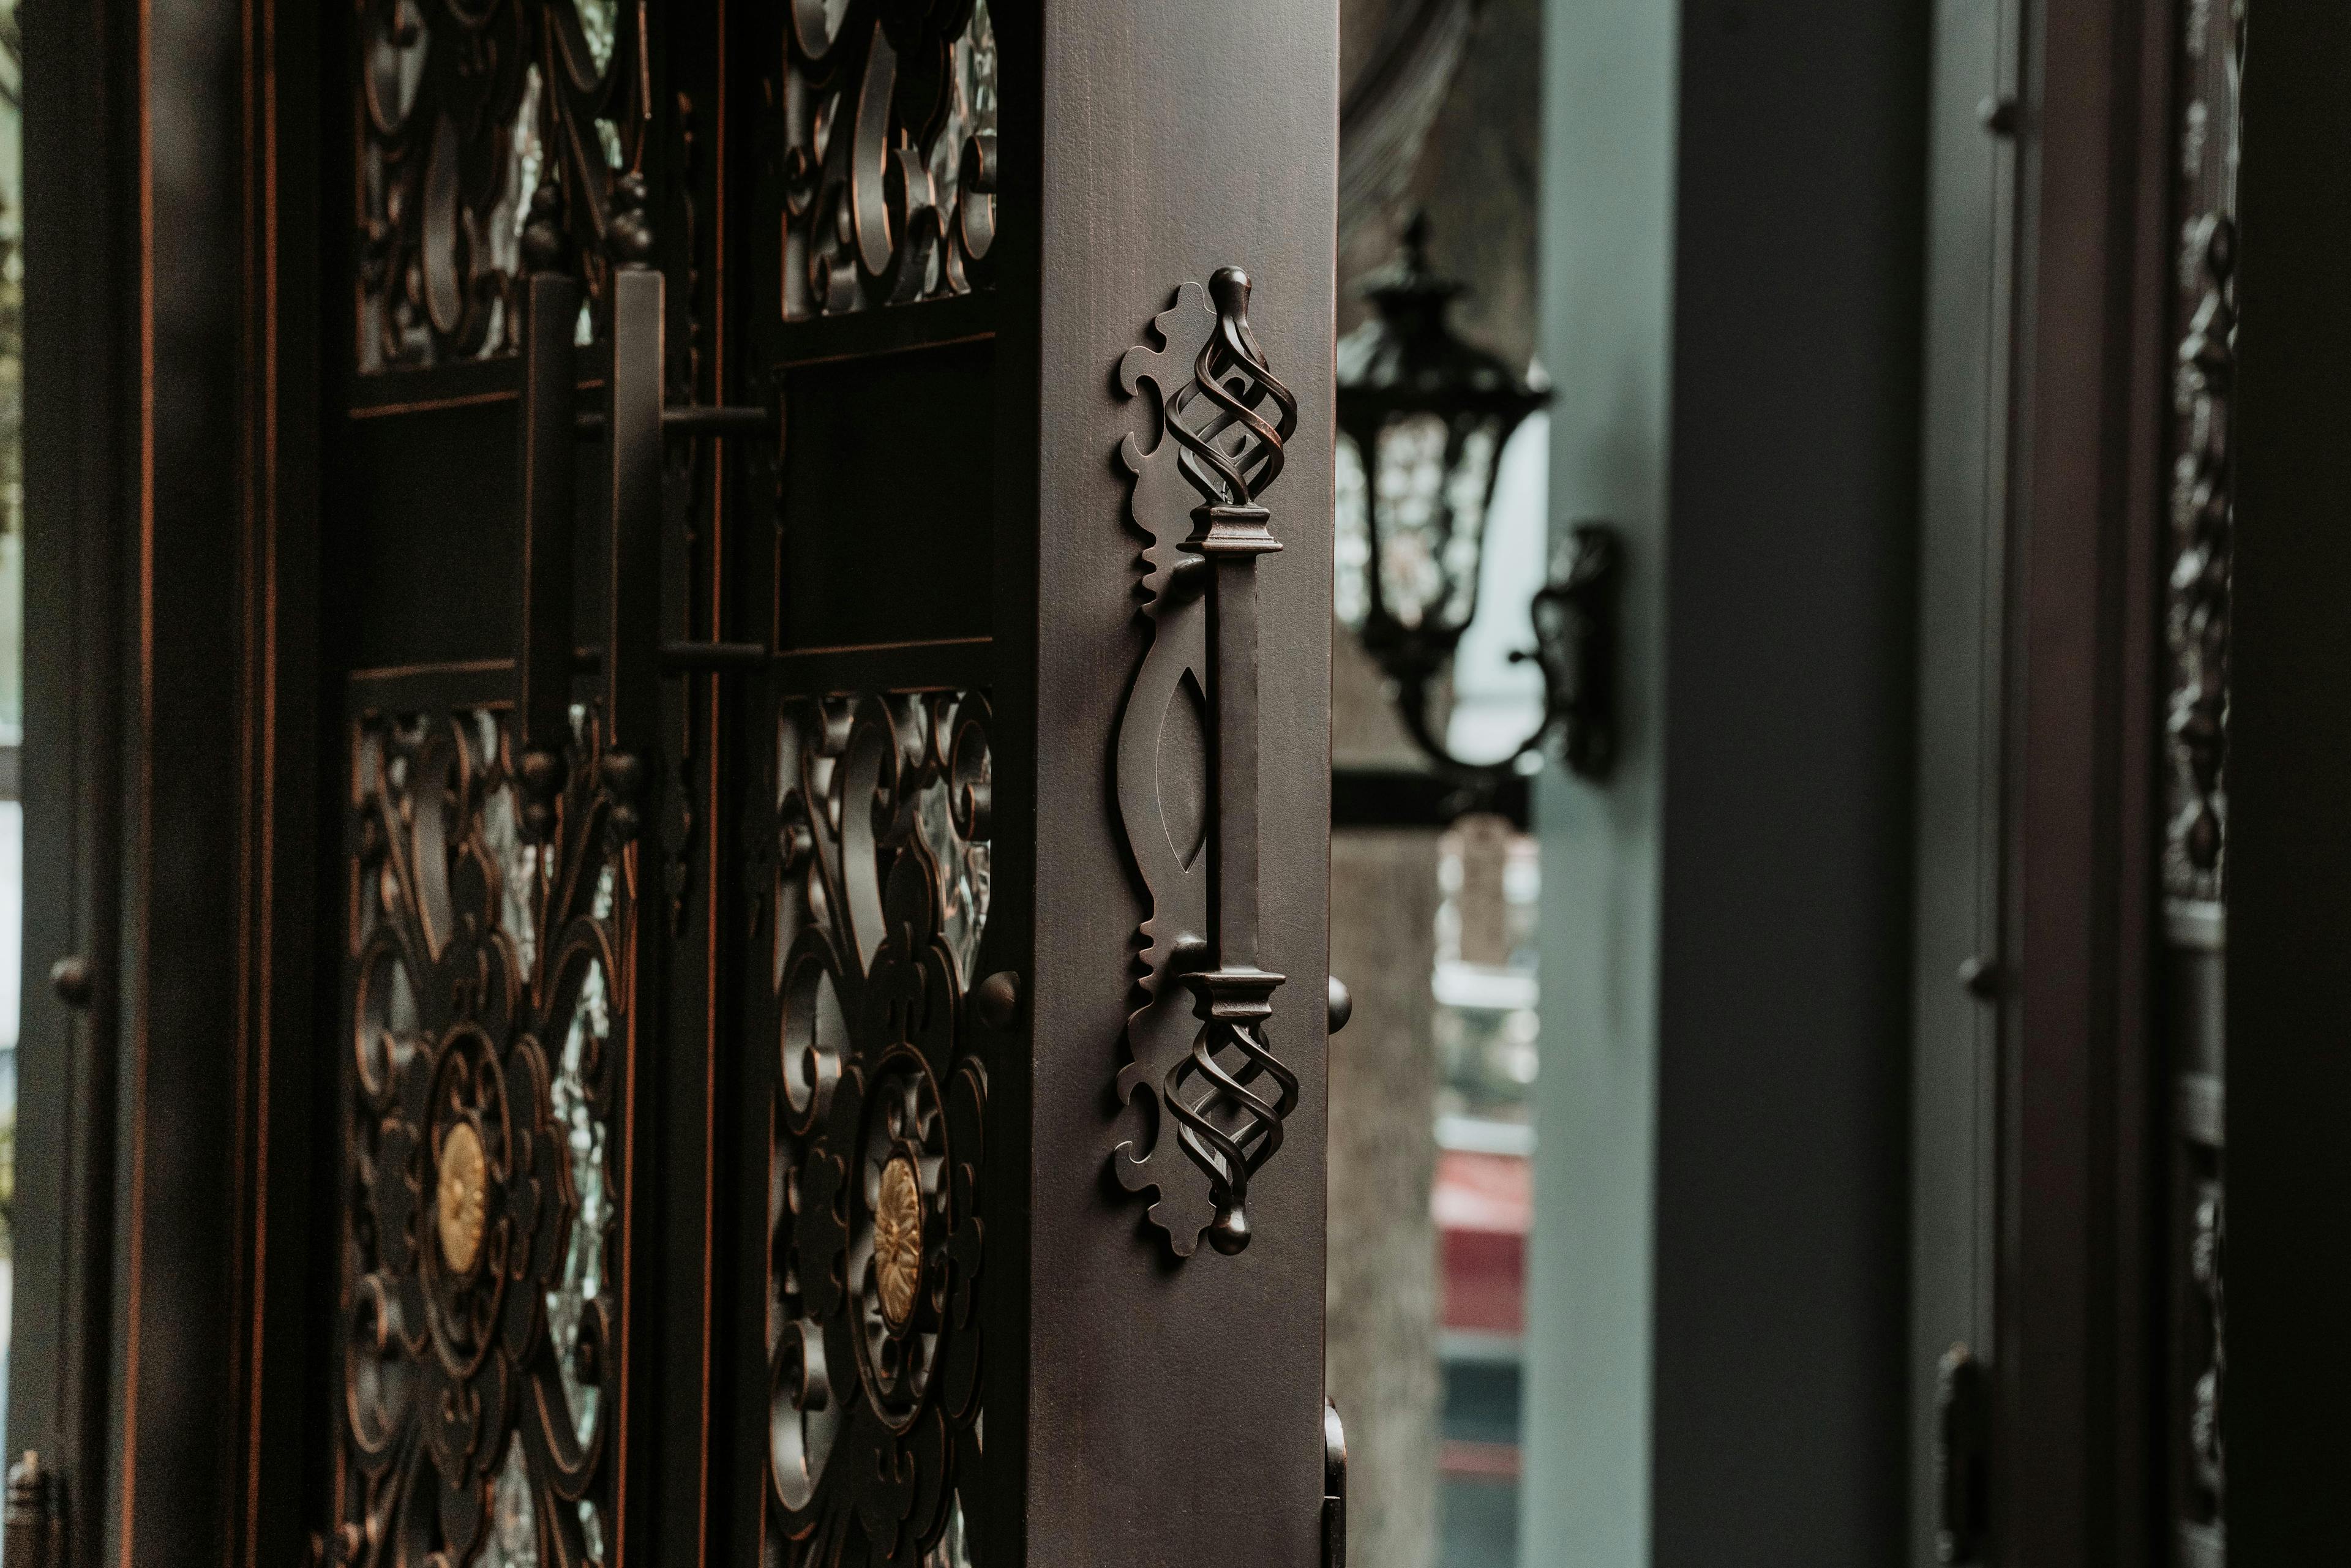 Custom wrought iron door with decorative grillwork and patterns